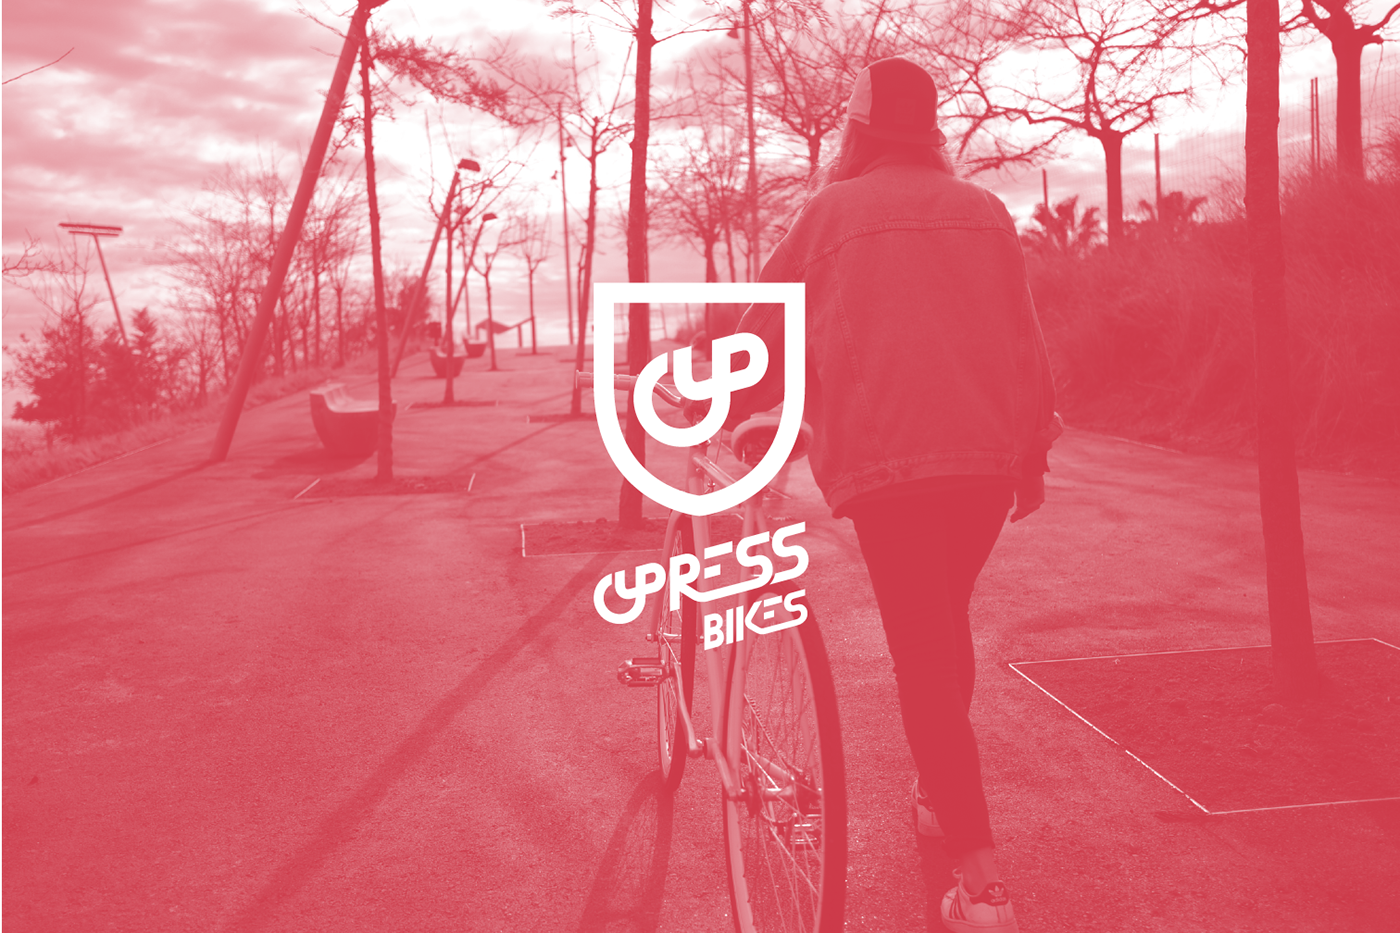 cypress bikes fixies fixed gear bikes Bicycle brand construction modern alternative Hipster Urban barcelona graphic design